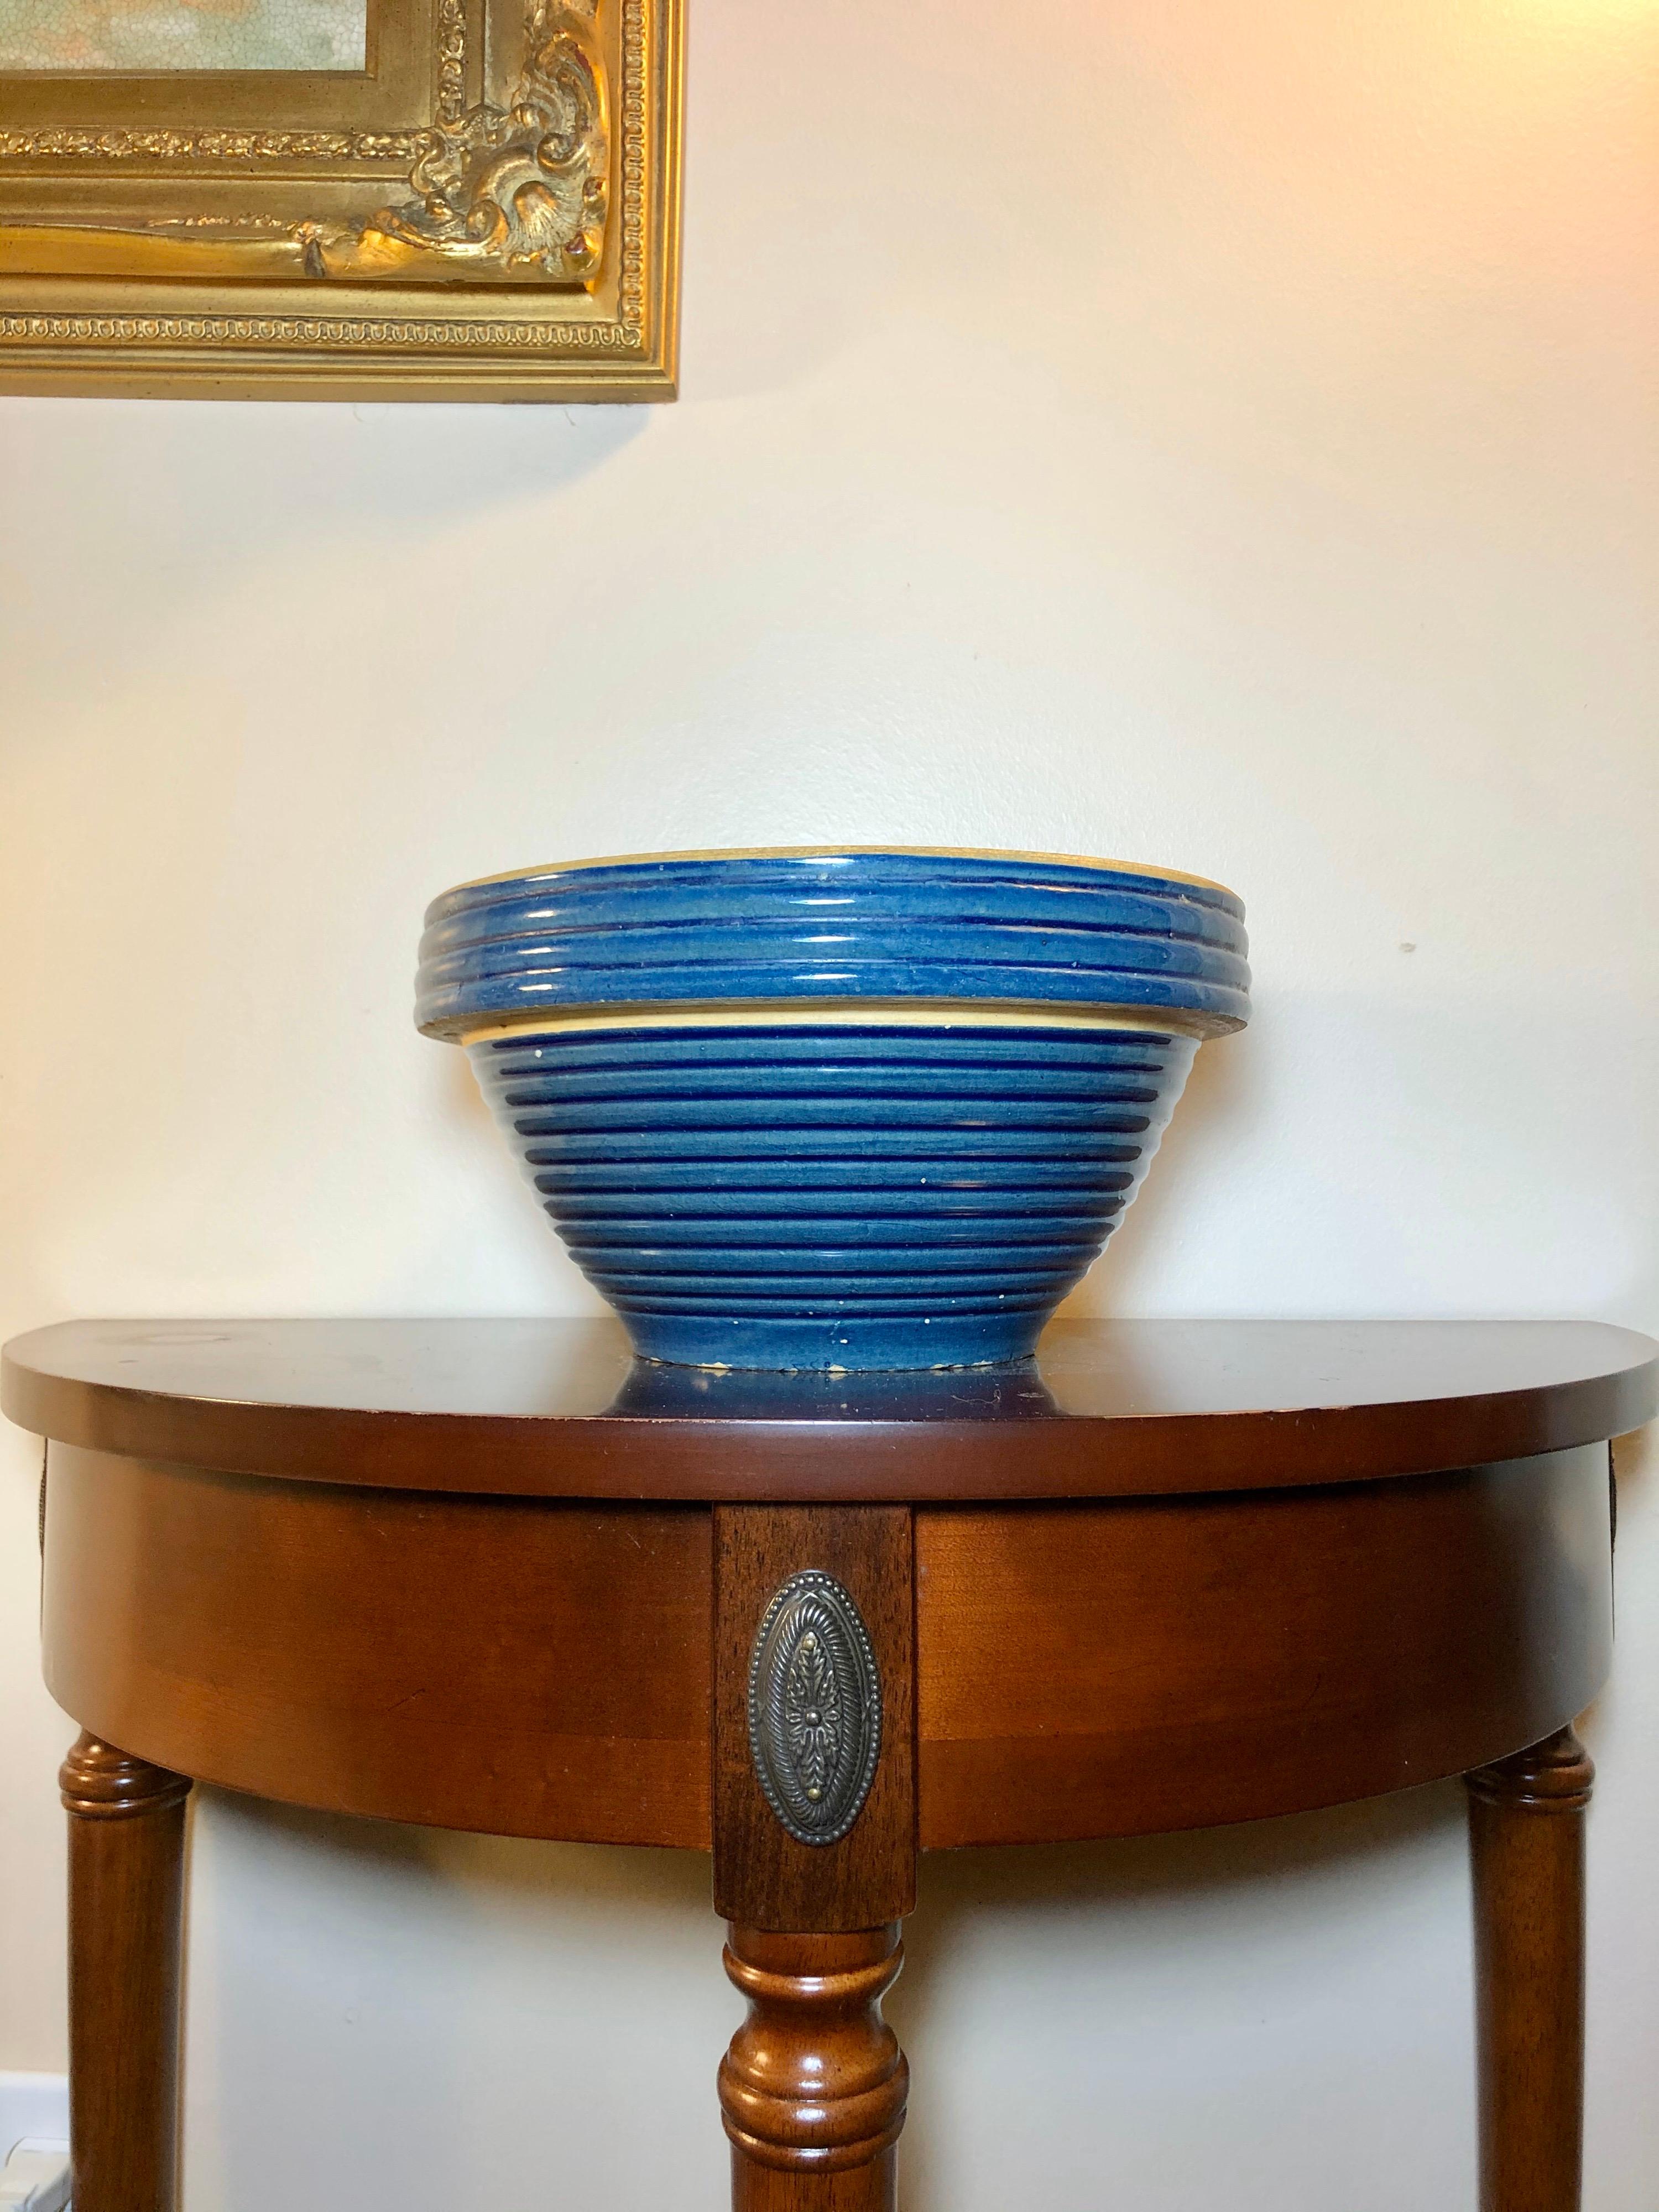 This cobalt blue stoneware mixing bowl is in excellent condition. Fired at very high temperatures, the mineral clay of stonewear melds together to create a very sturdy, non-porous surface. This cobalt blue color is one of the most sought-after and